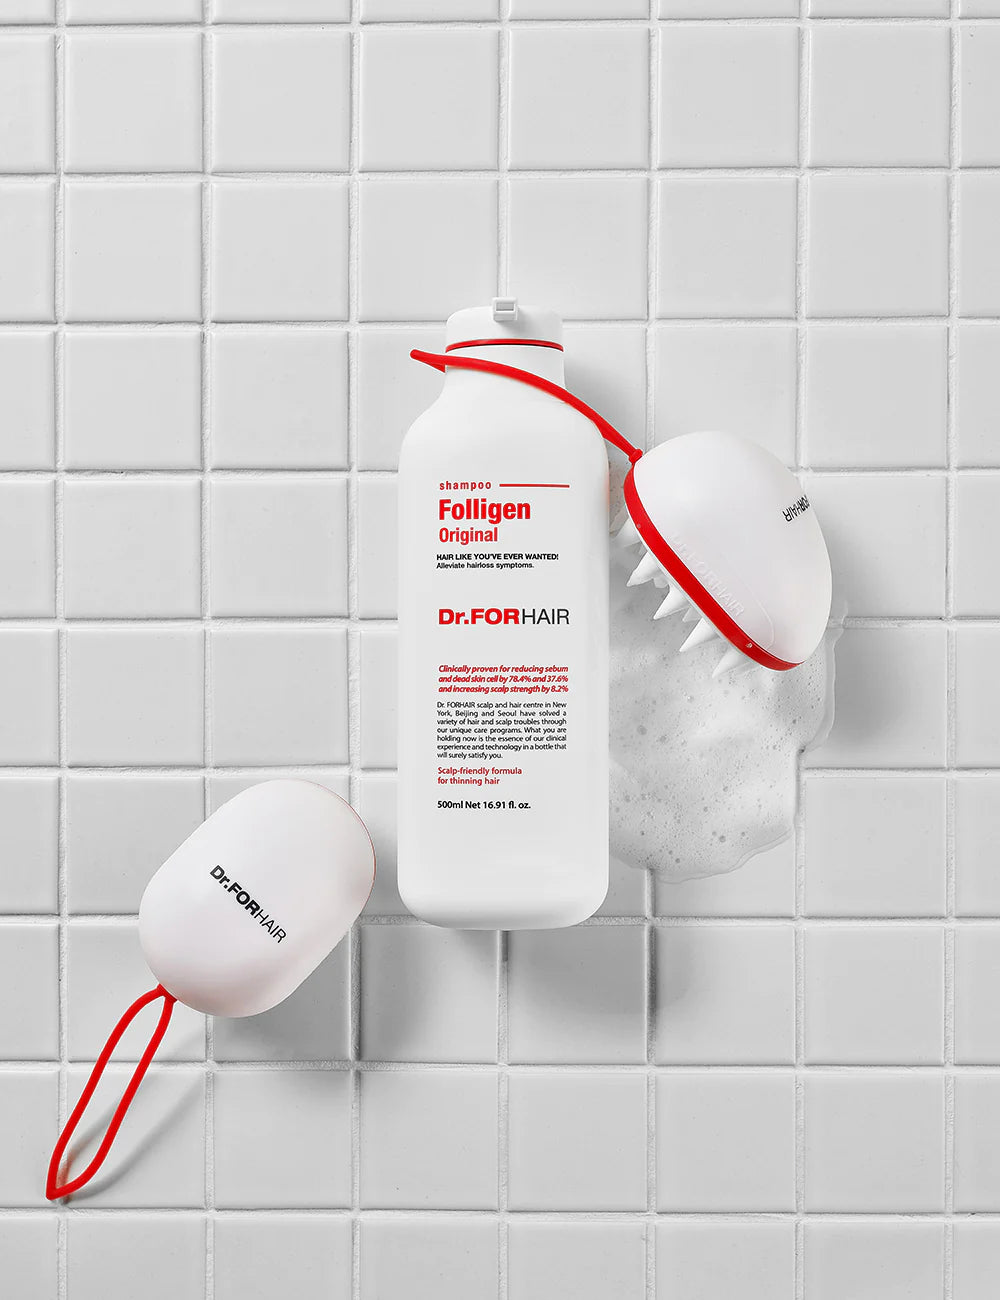 Dr.FORHAIR - Scalp Cleansing Brush